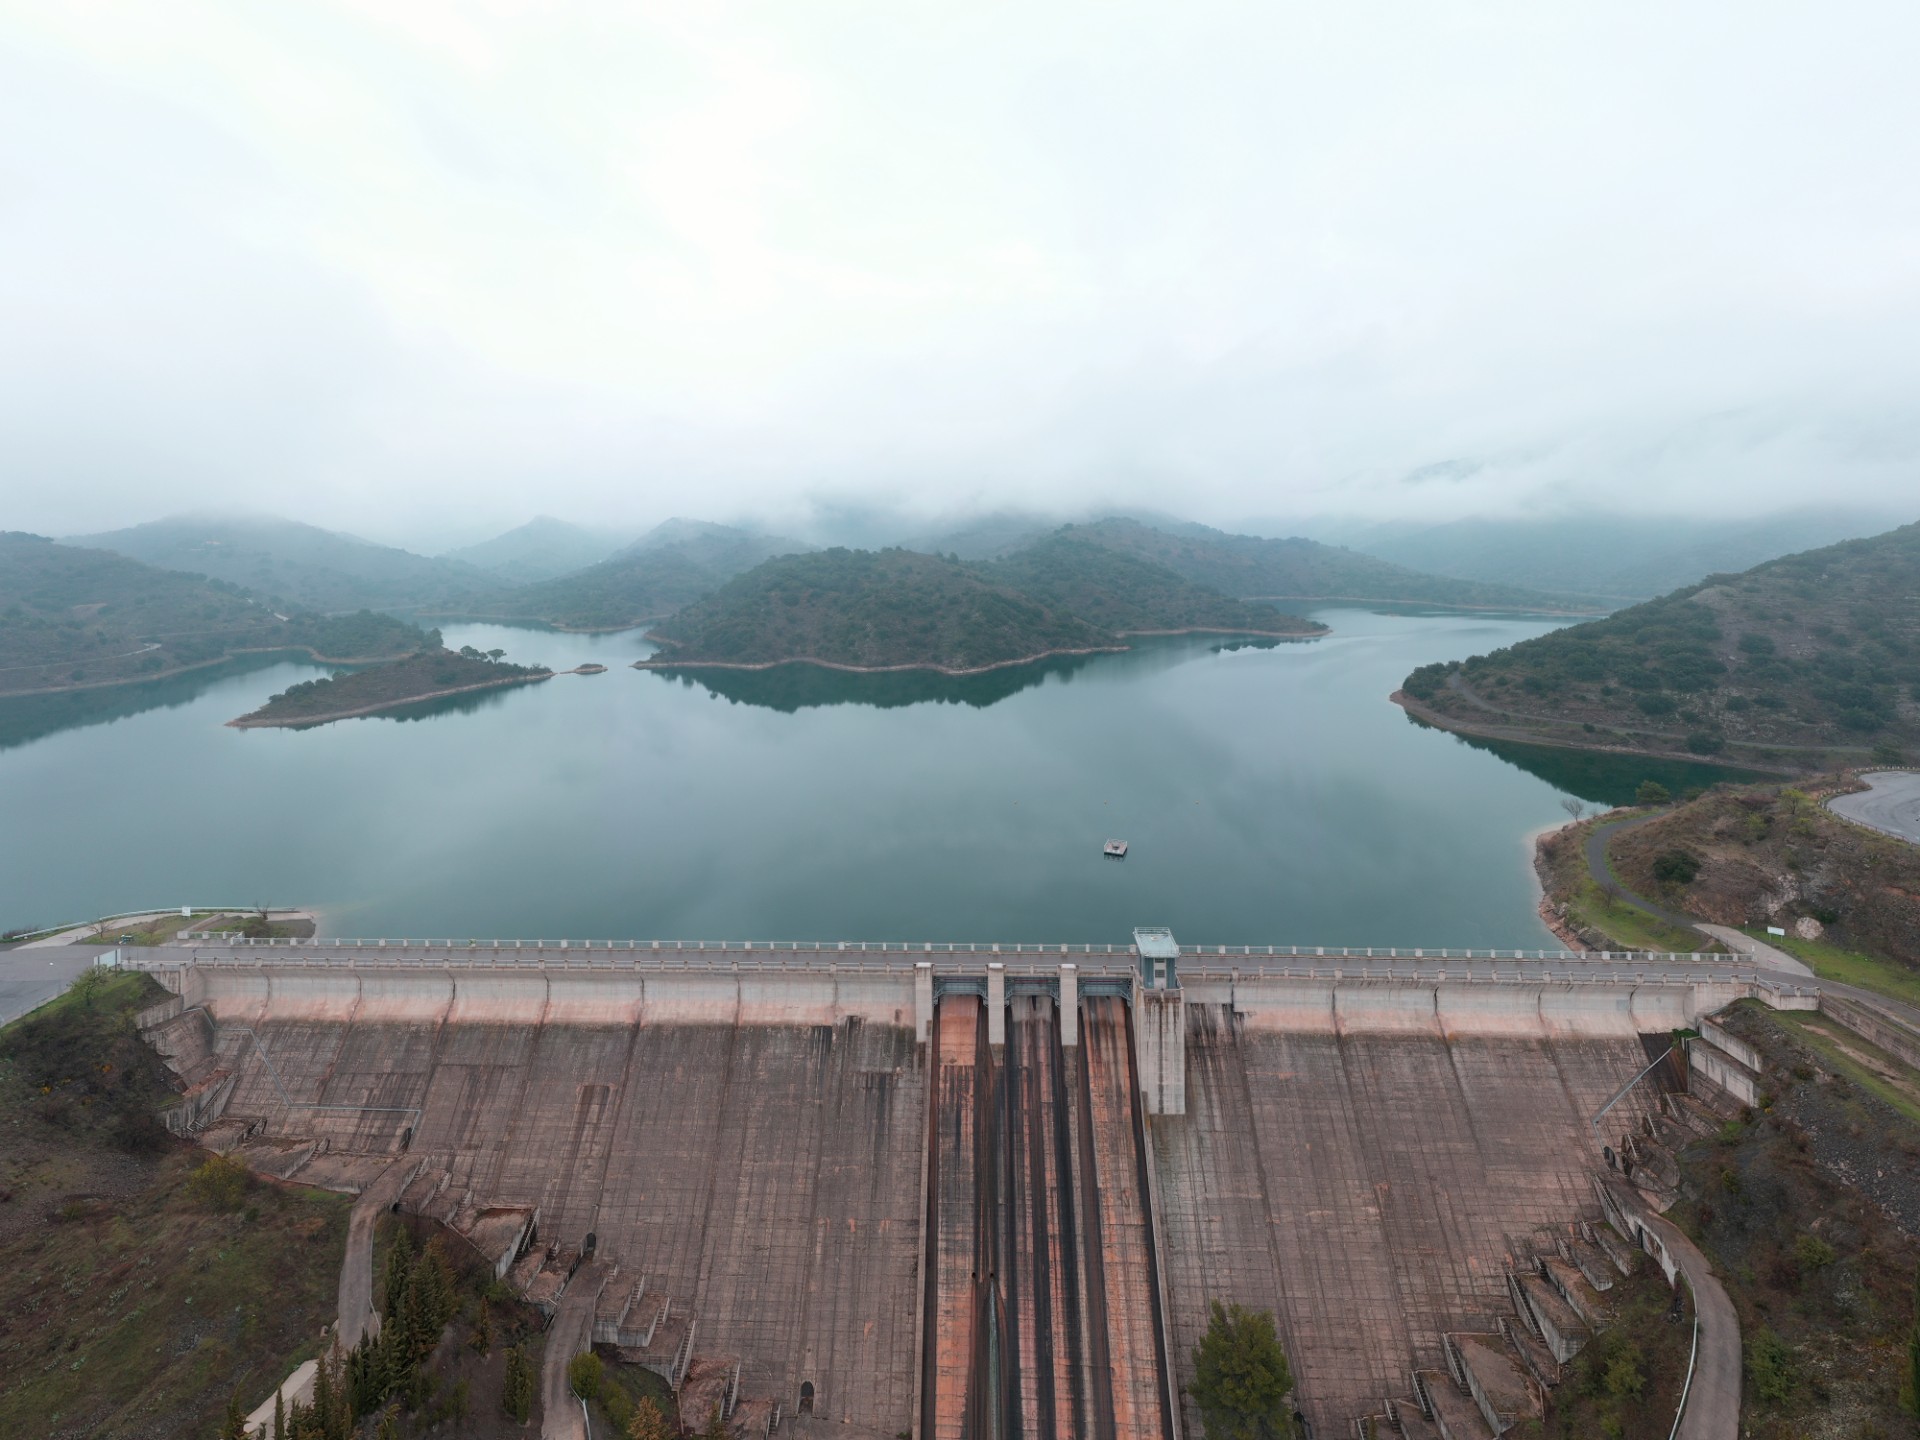 Dam construction on the upper Mekong River in China (such as the Xiaowan Dam pictured here) has sparked protests from downstream neighbours.